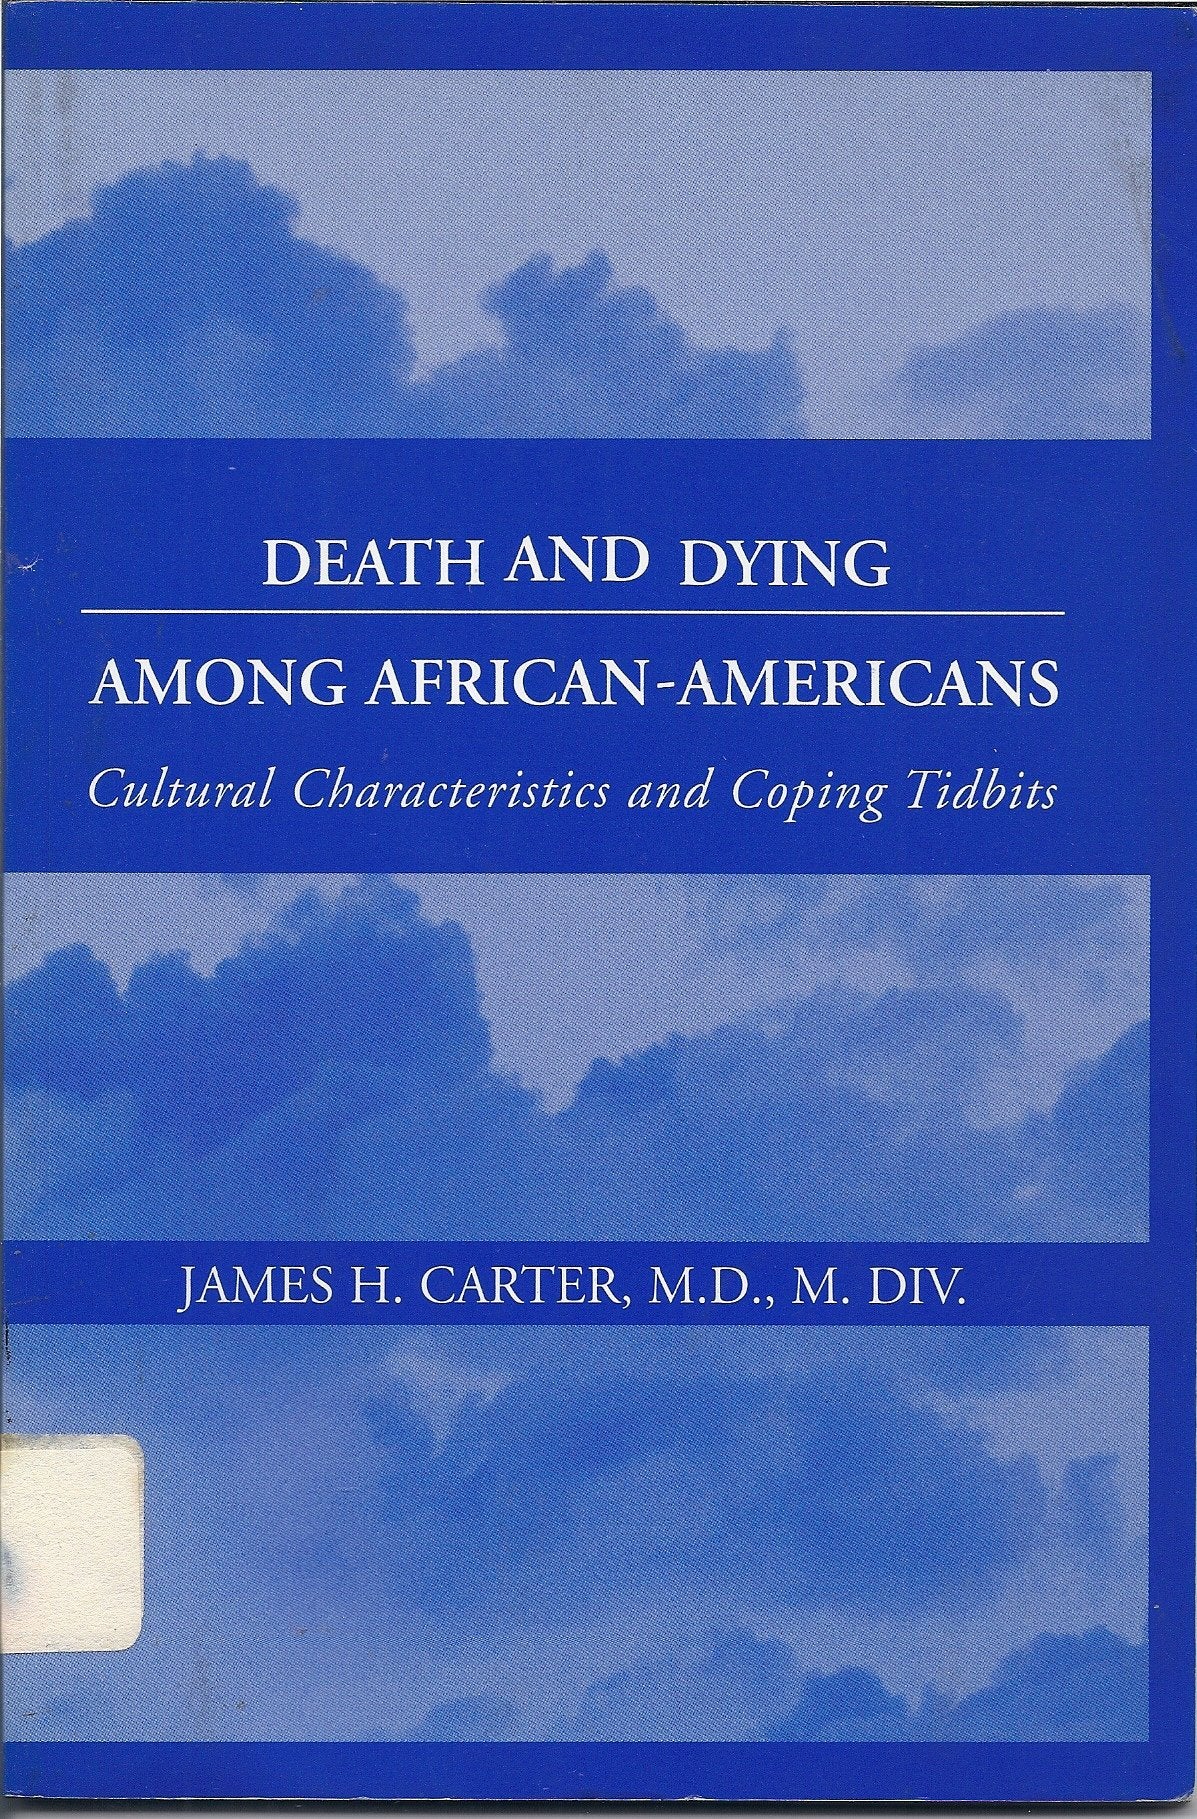 Death and Dying Among African-American's: Cultural Characteristics and Coping Tidbits